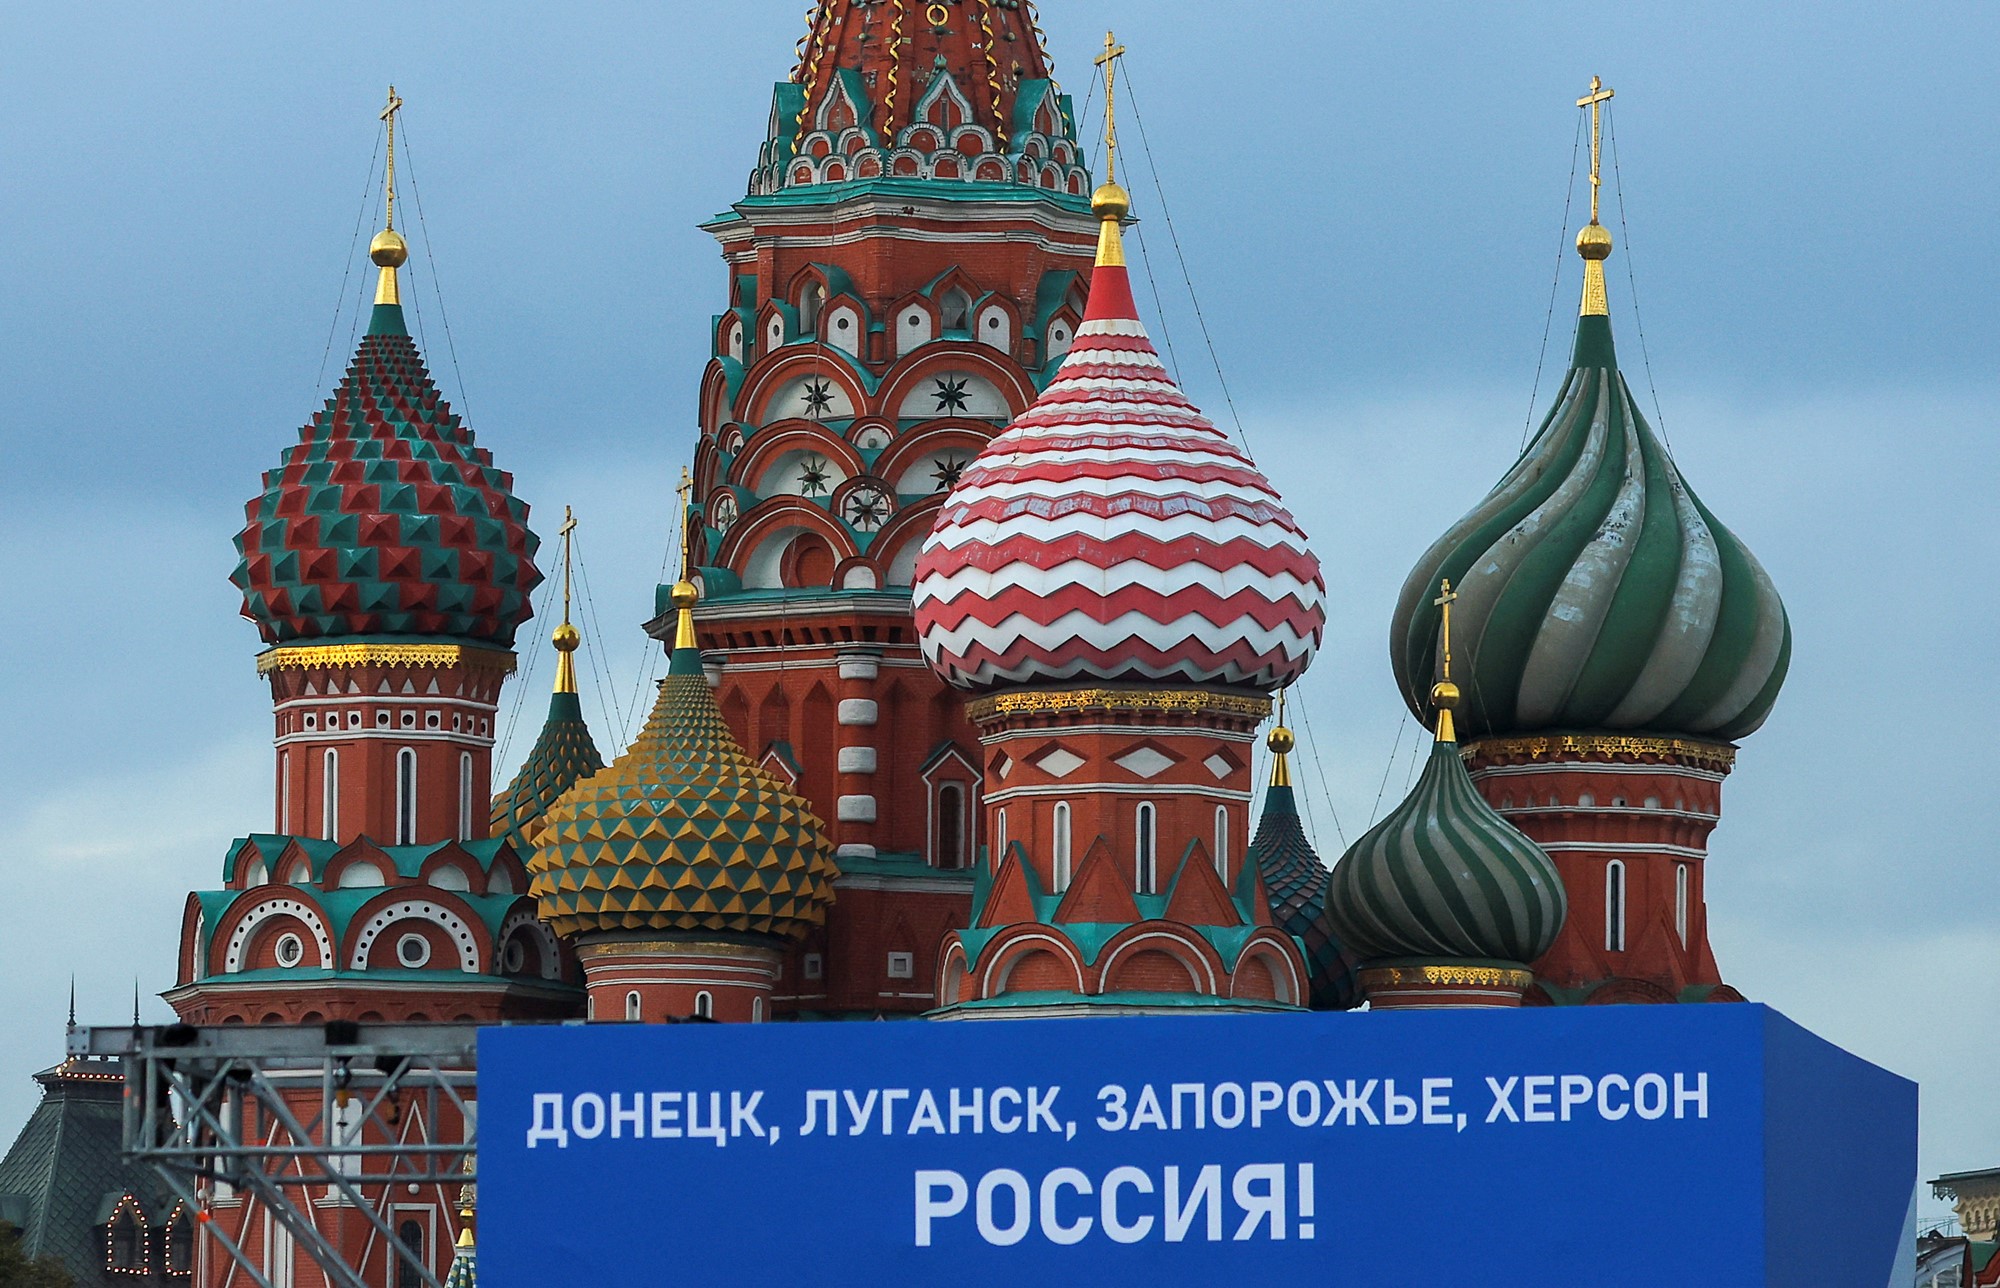 A sign in Russian against the backdrop of St Basil's Cathedral.